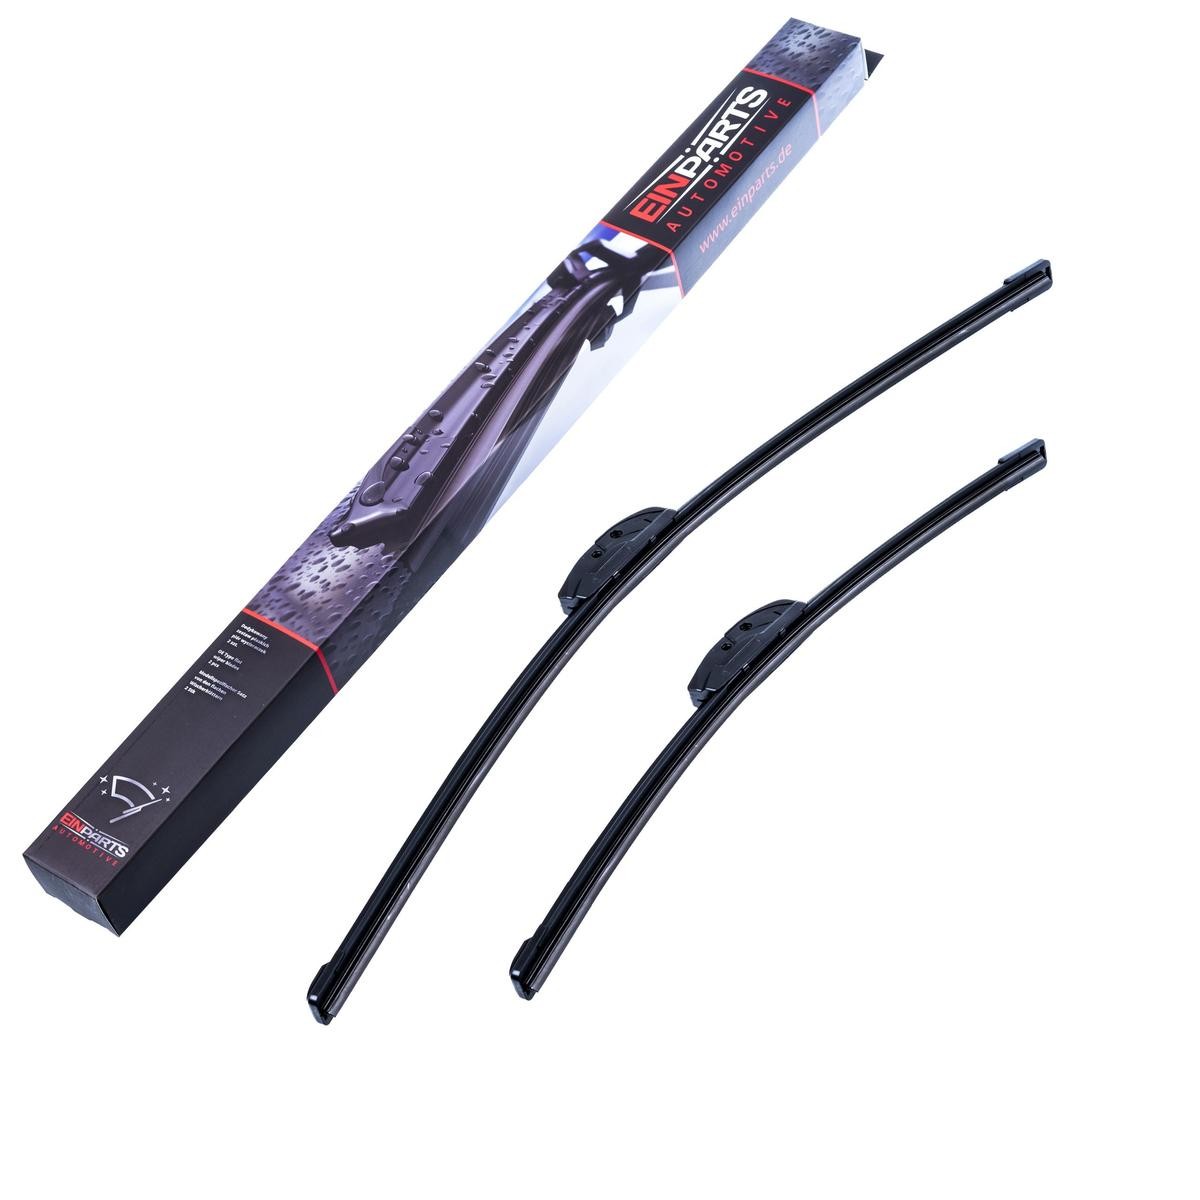 A 187 S EINPARTS 610, 450 mm, Beam, for left-hand drive vehicles Left-/right-hand drive vehicles: for left-hand drive vehicles Wiper blades EPWBDU2418 buy